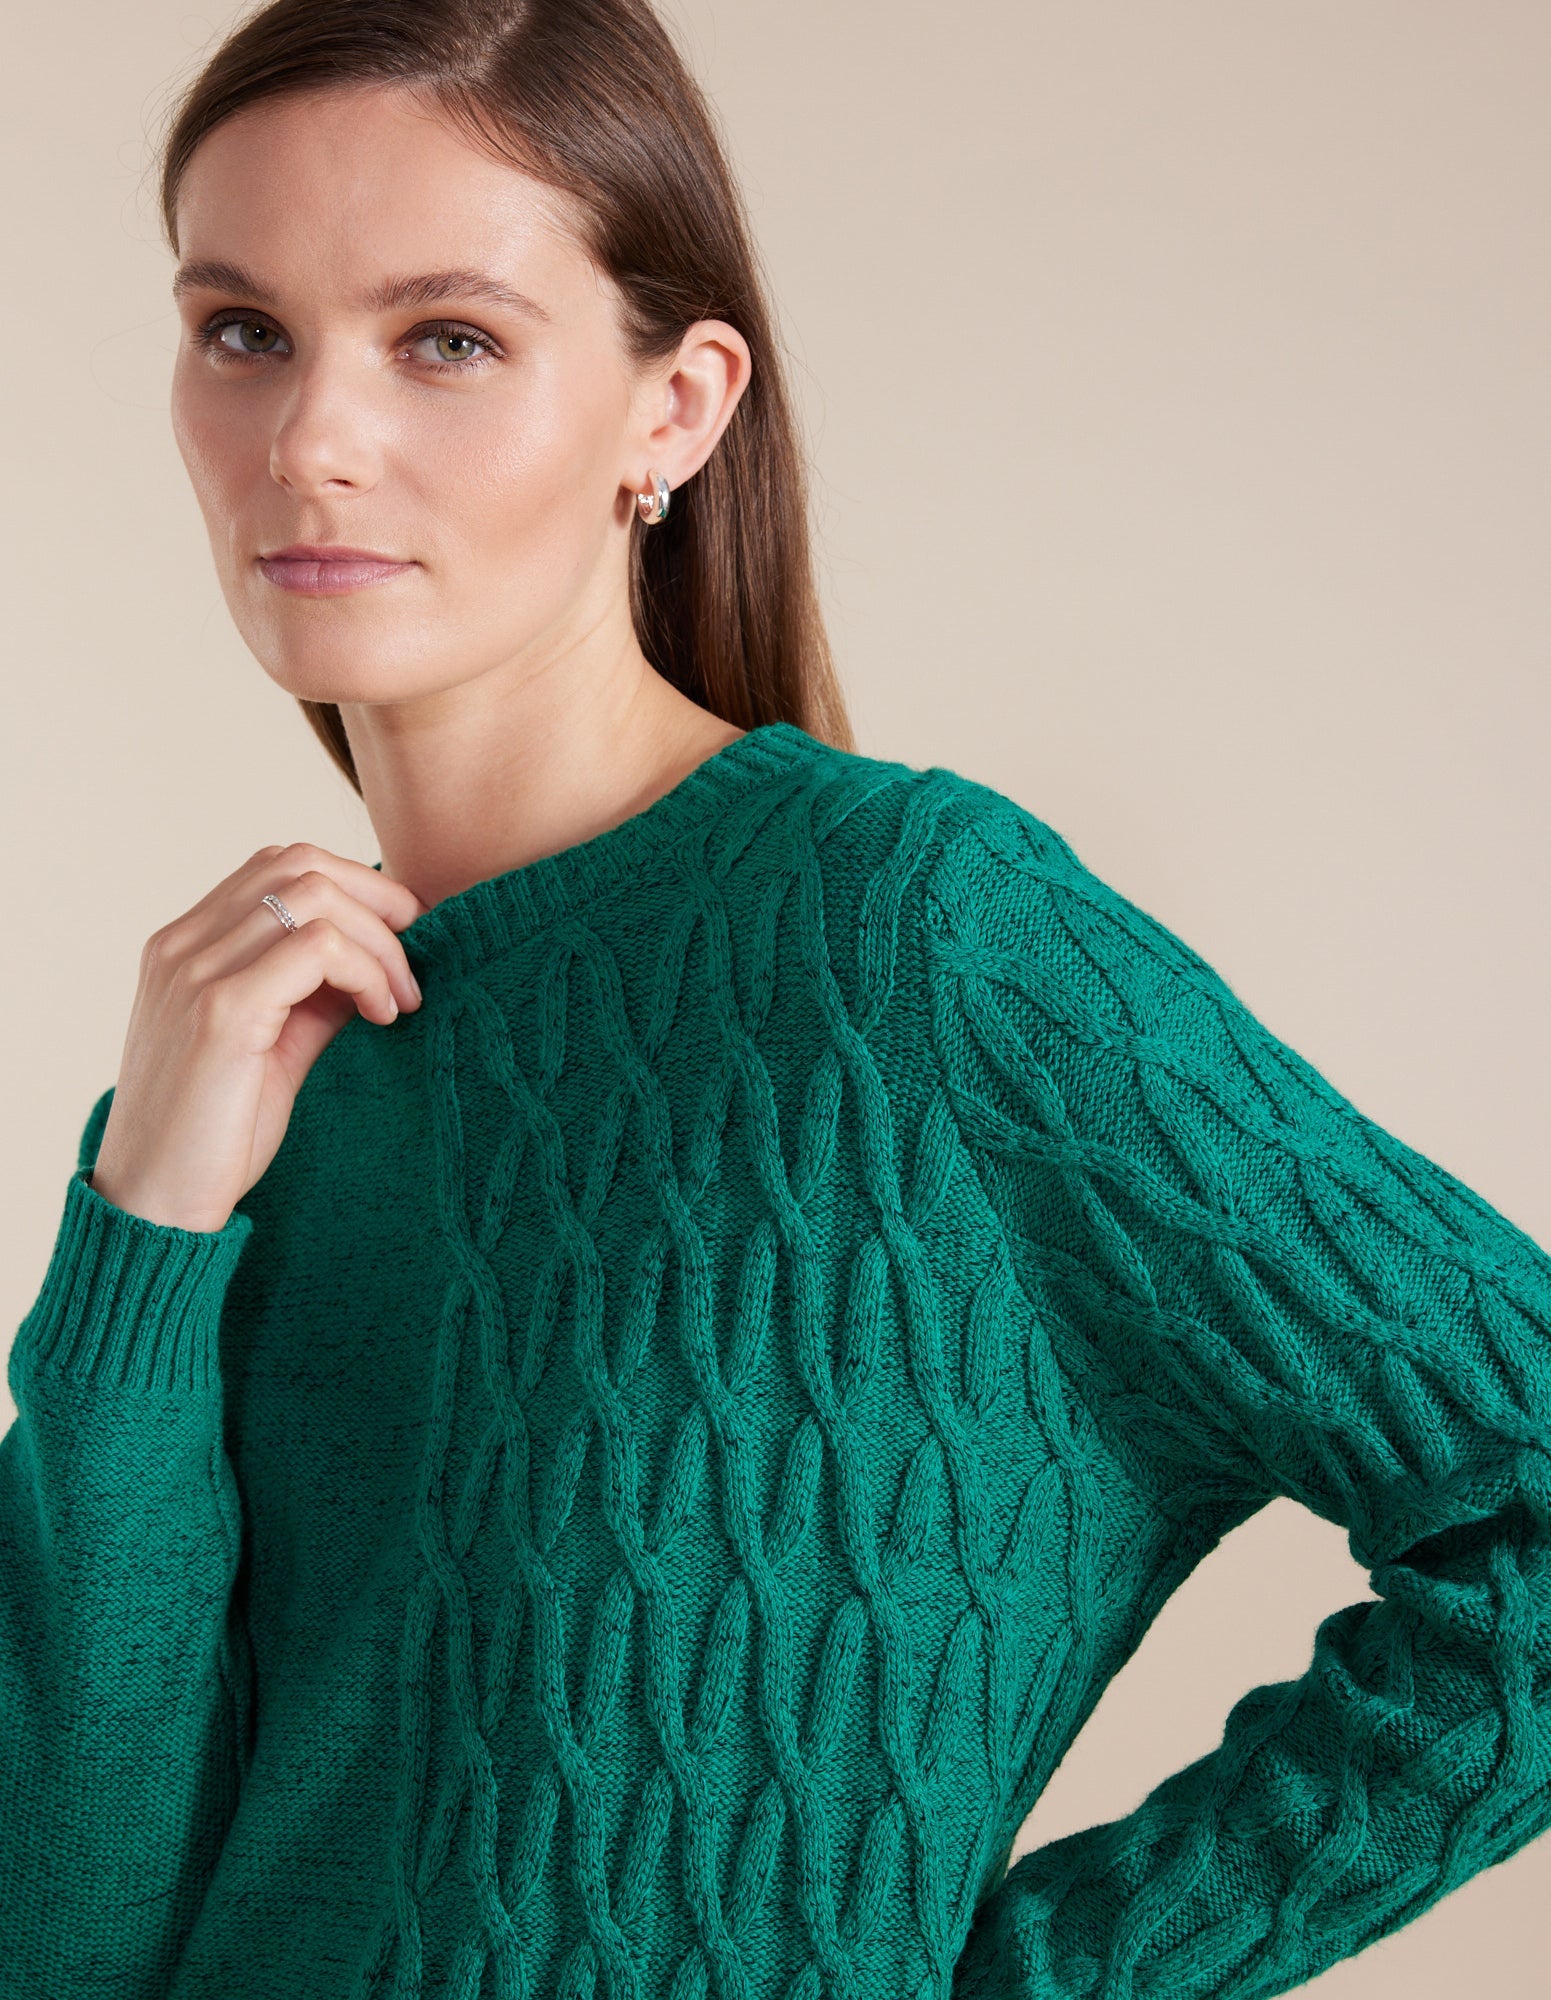 MARCO POLO L/S CABLE KNIT - FOREST - THE VOGUE STORE